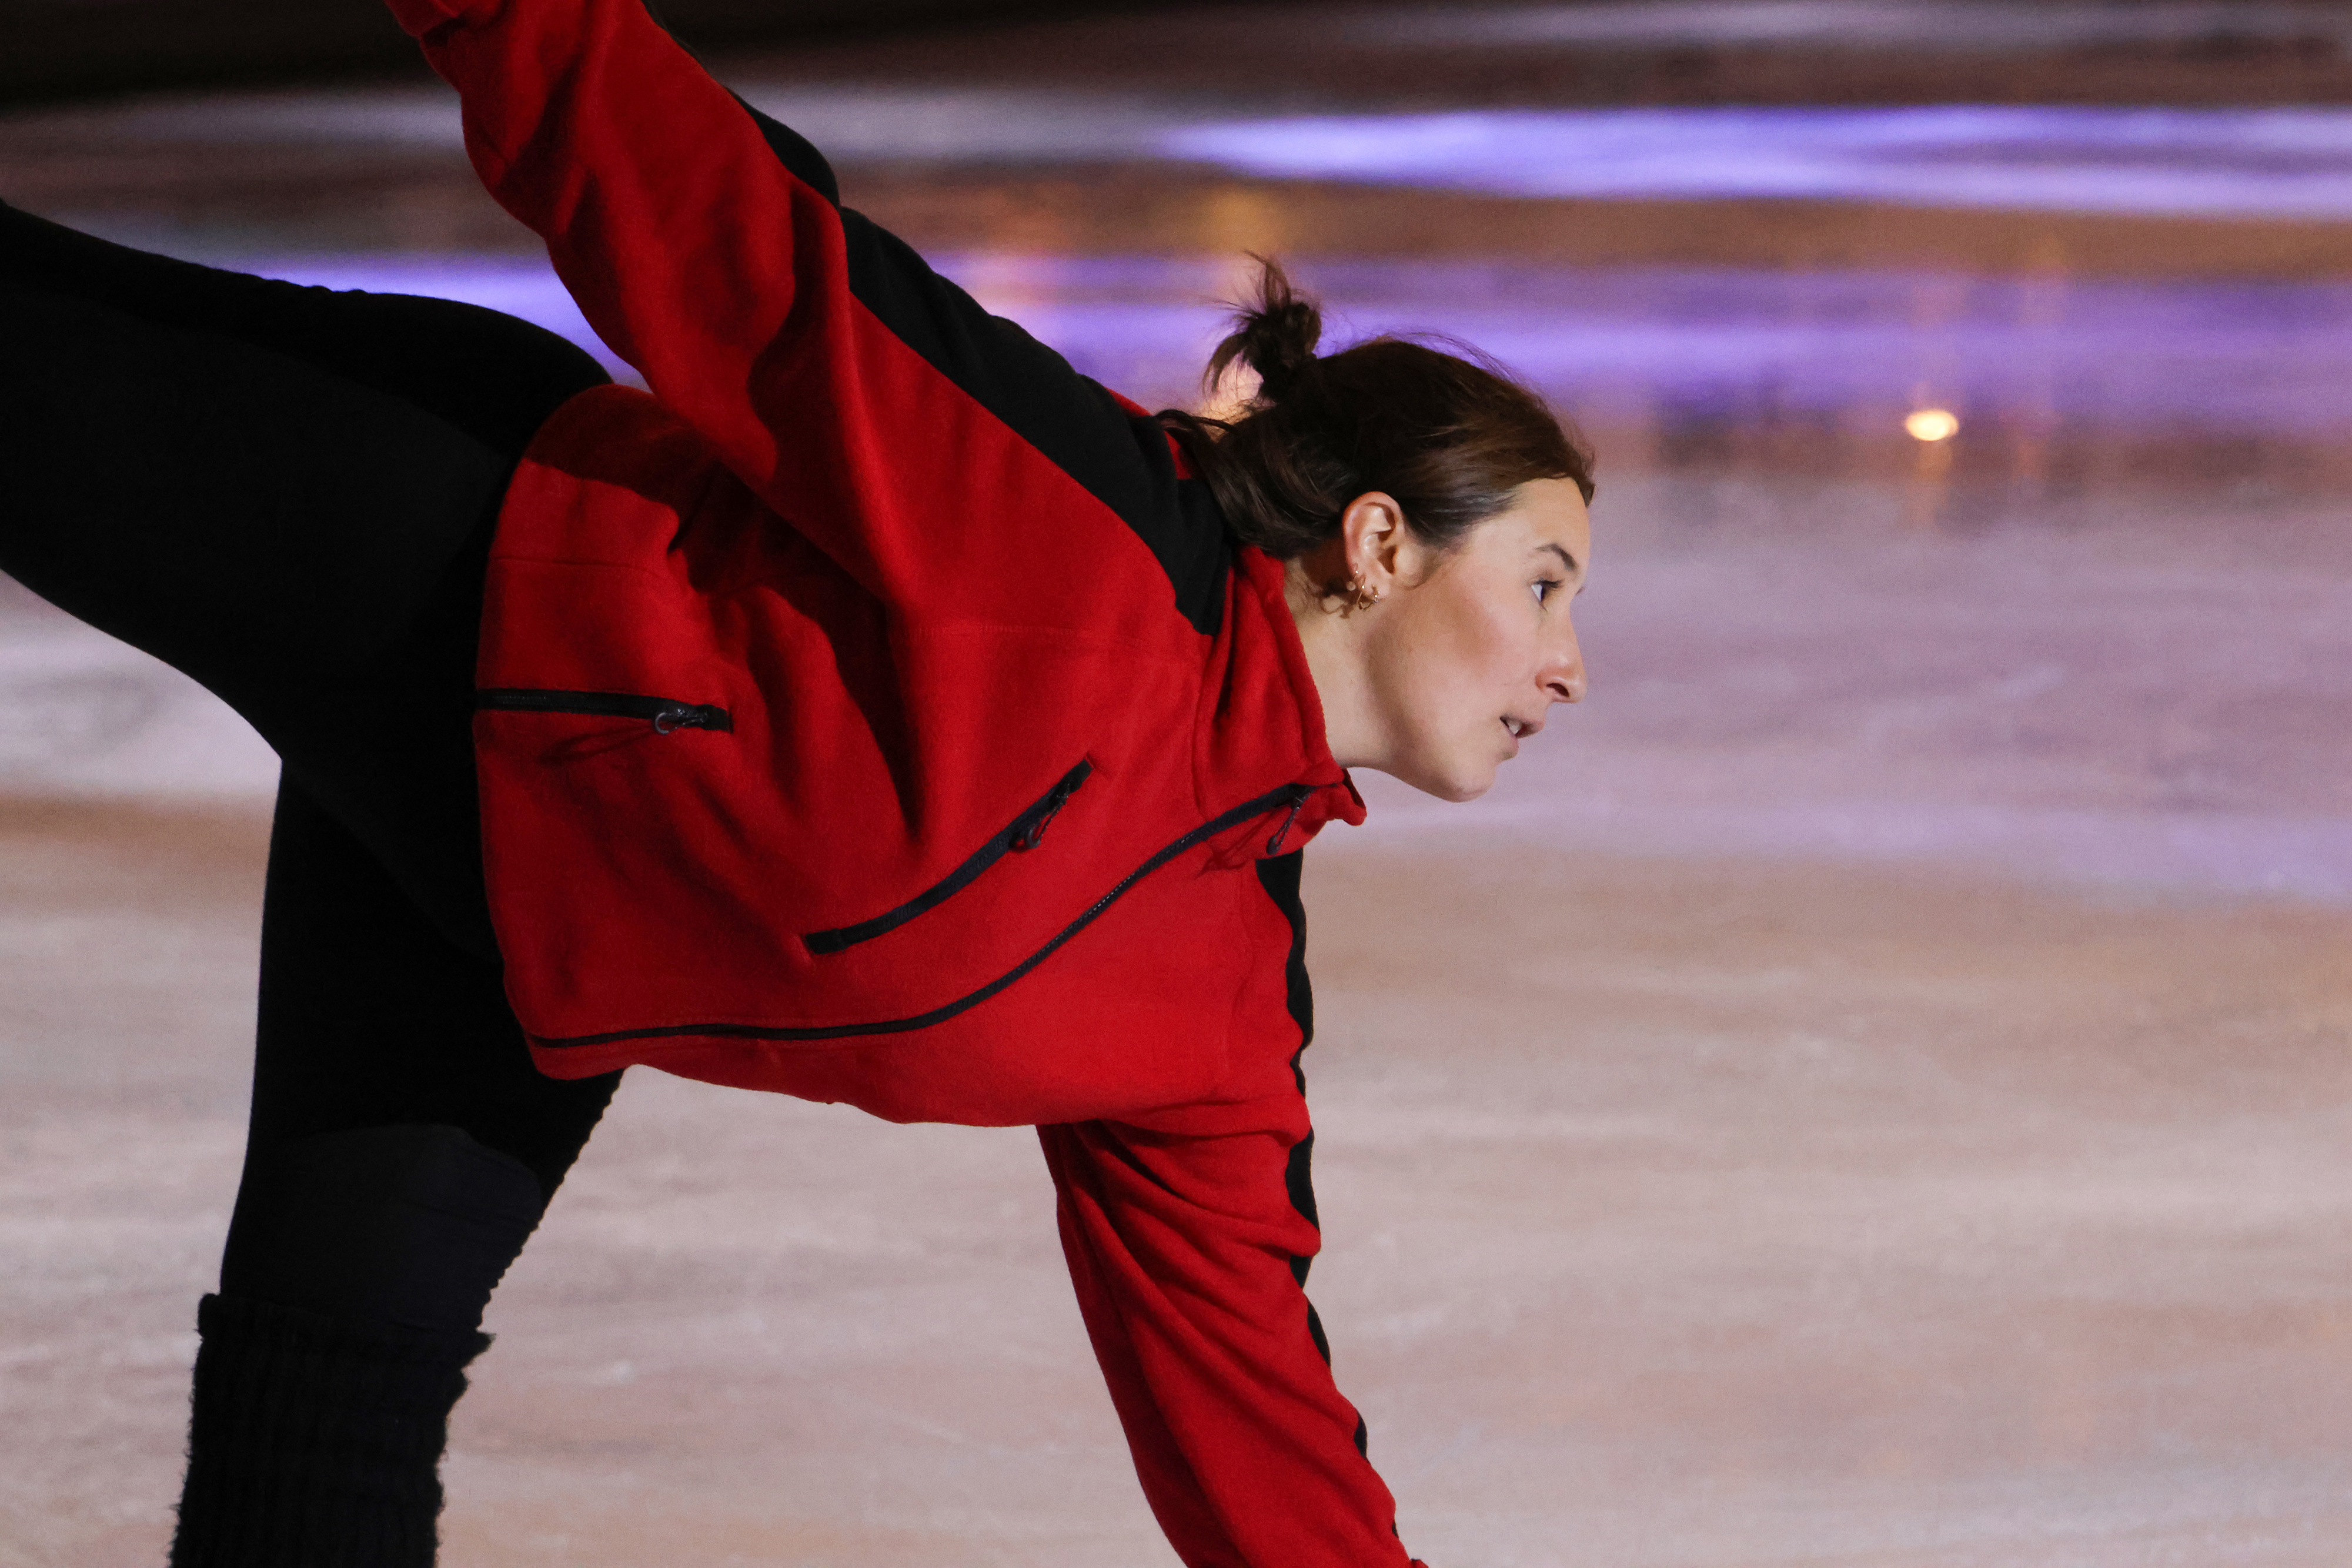 An ice skater performing a routine